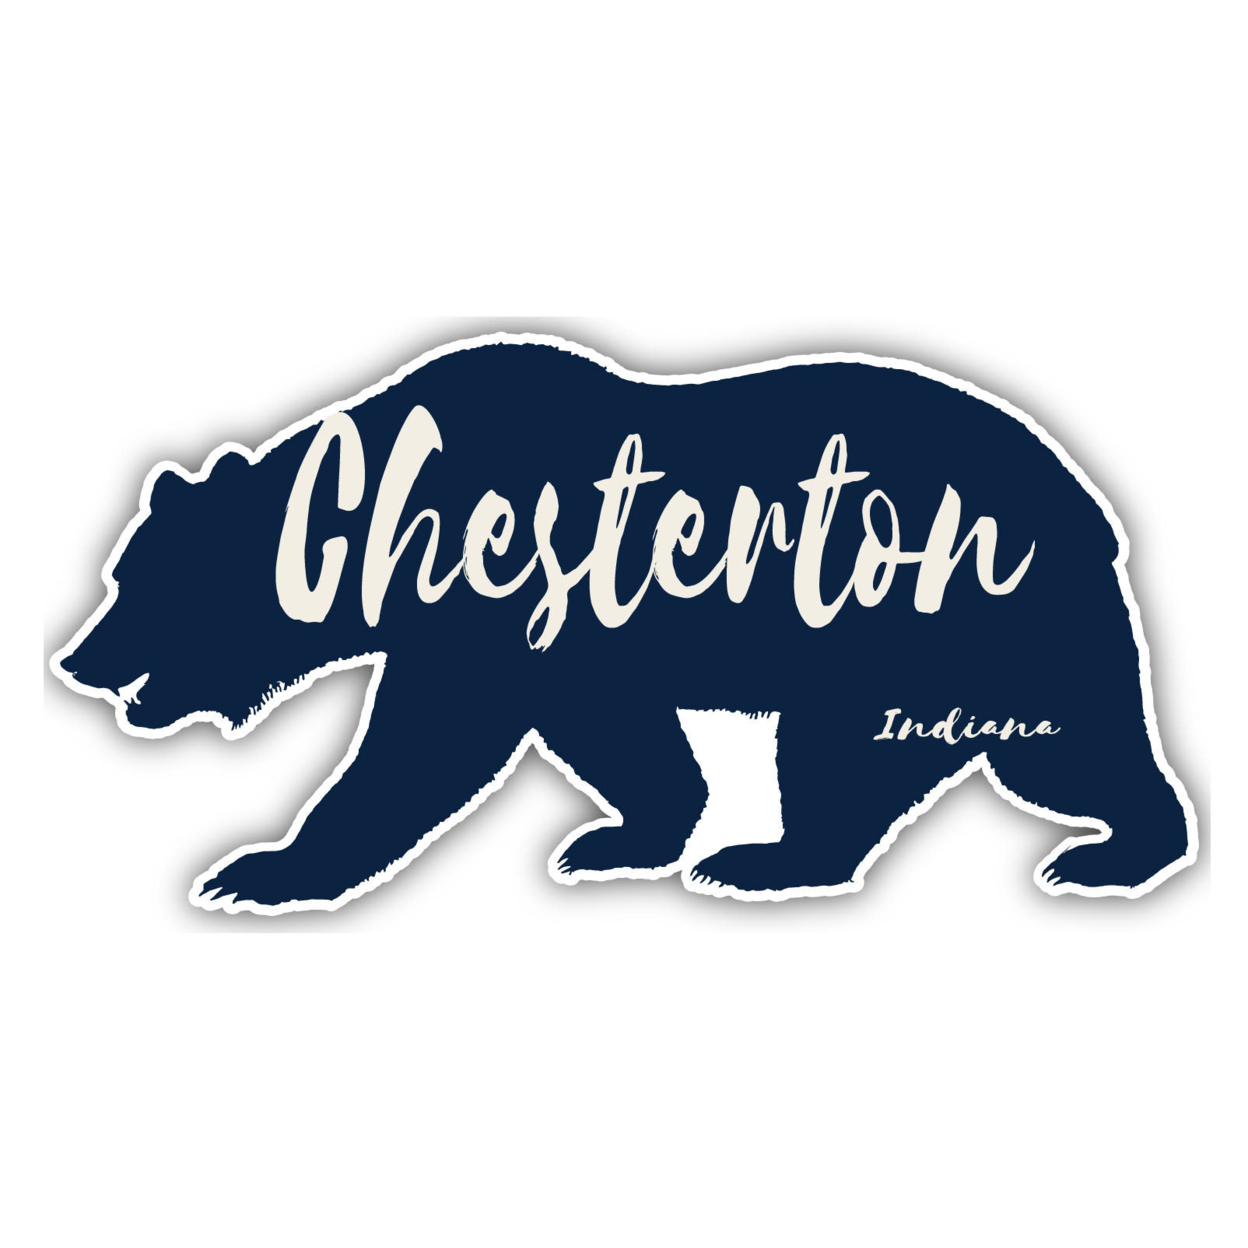 Chesterton Indiana Souvenir Decorative Stickers (Choose Theme And Size) - Single Unit, 8-Inch, Adventures Awaits